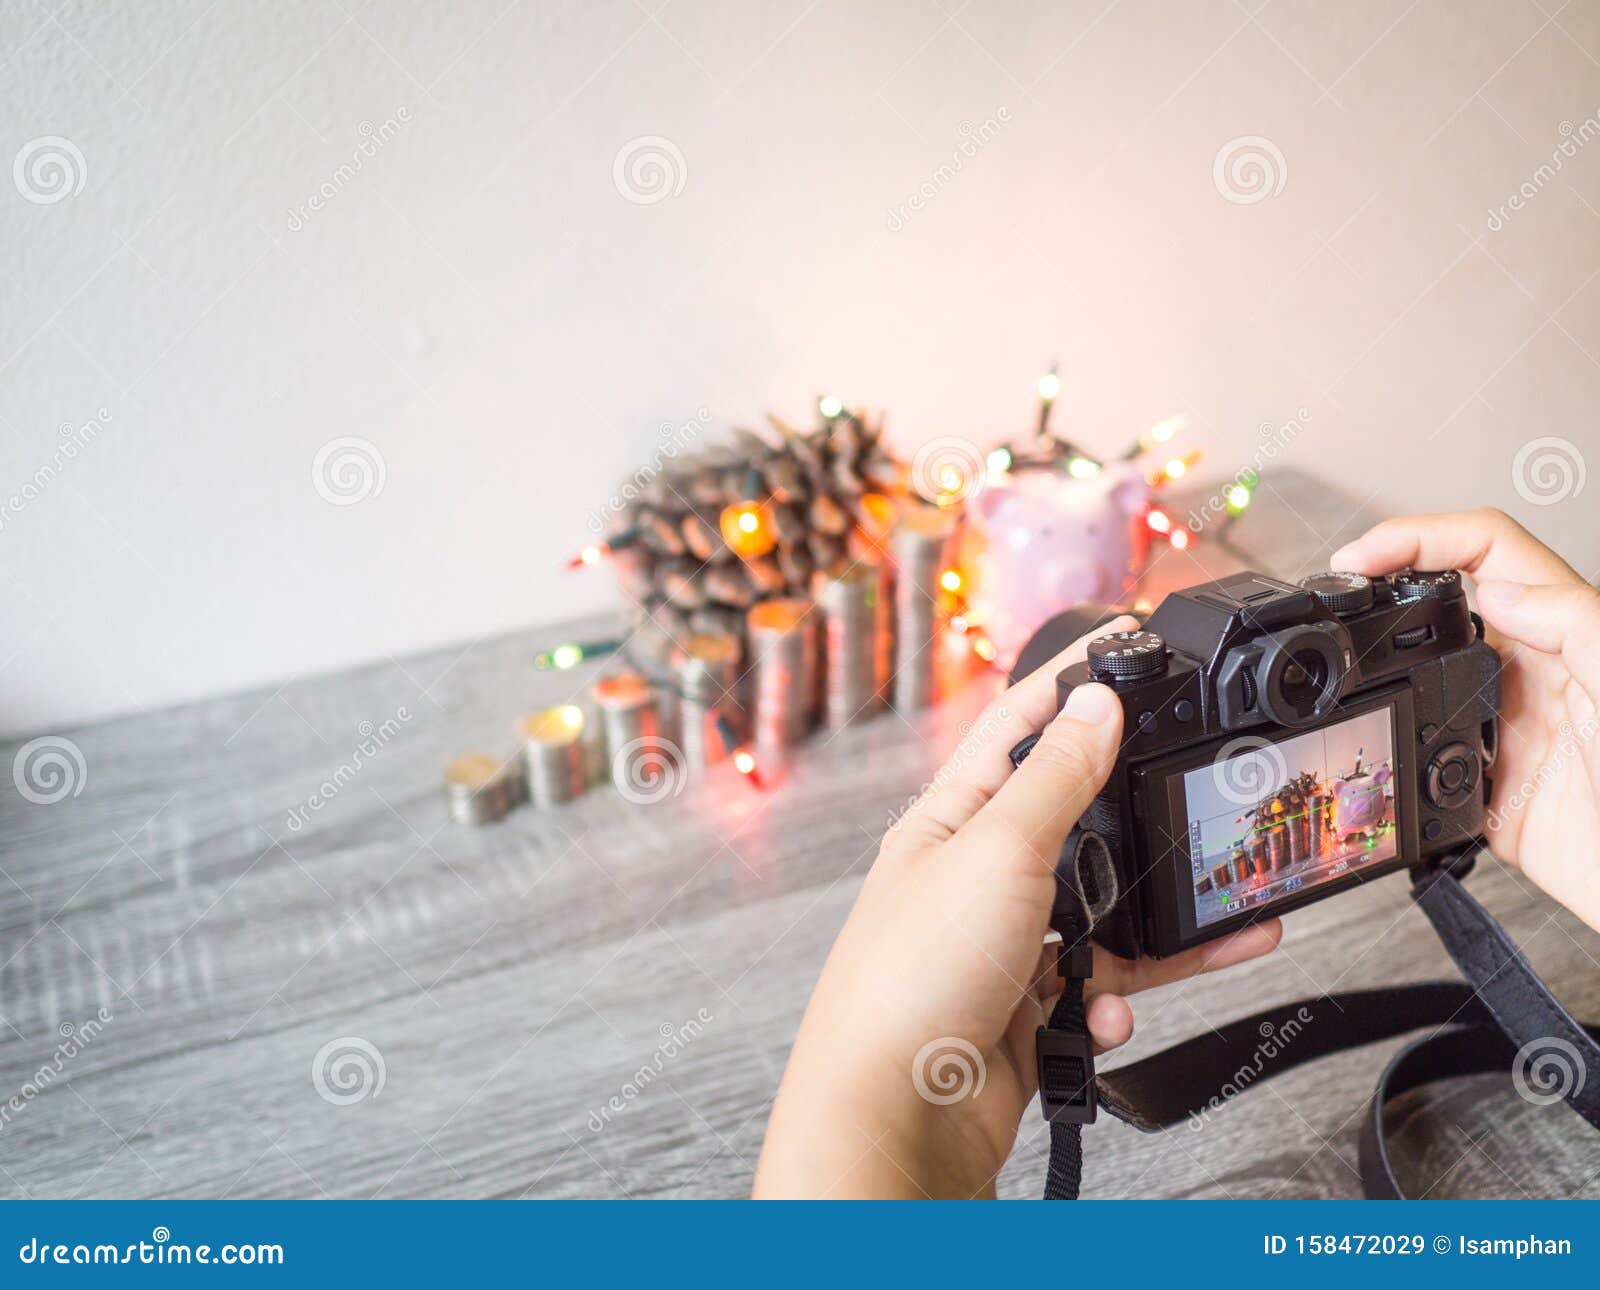 the photographer is intending to use digital camera take pictures of the pink piggy bank and party light